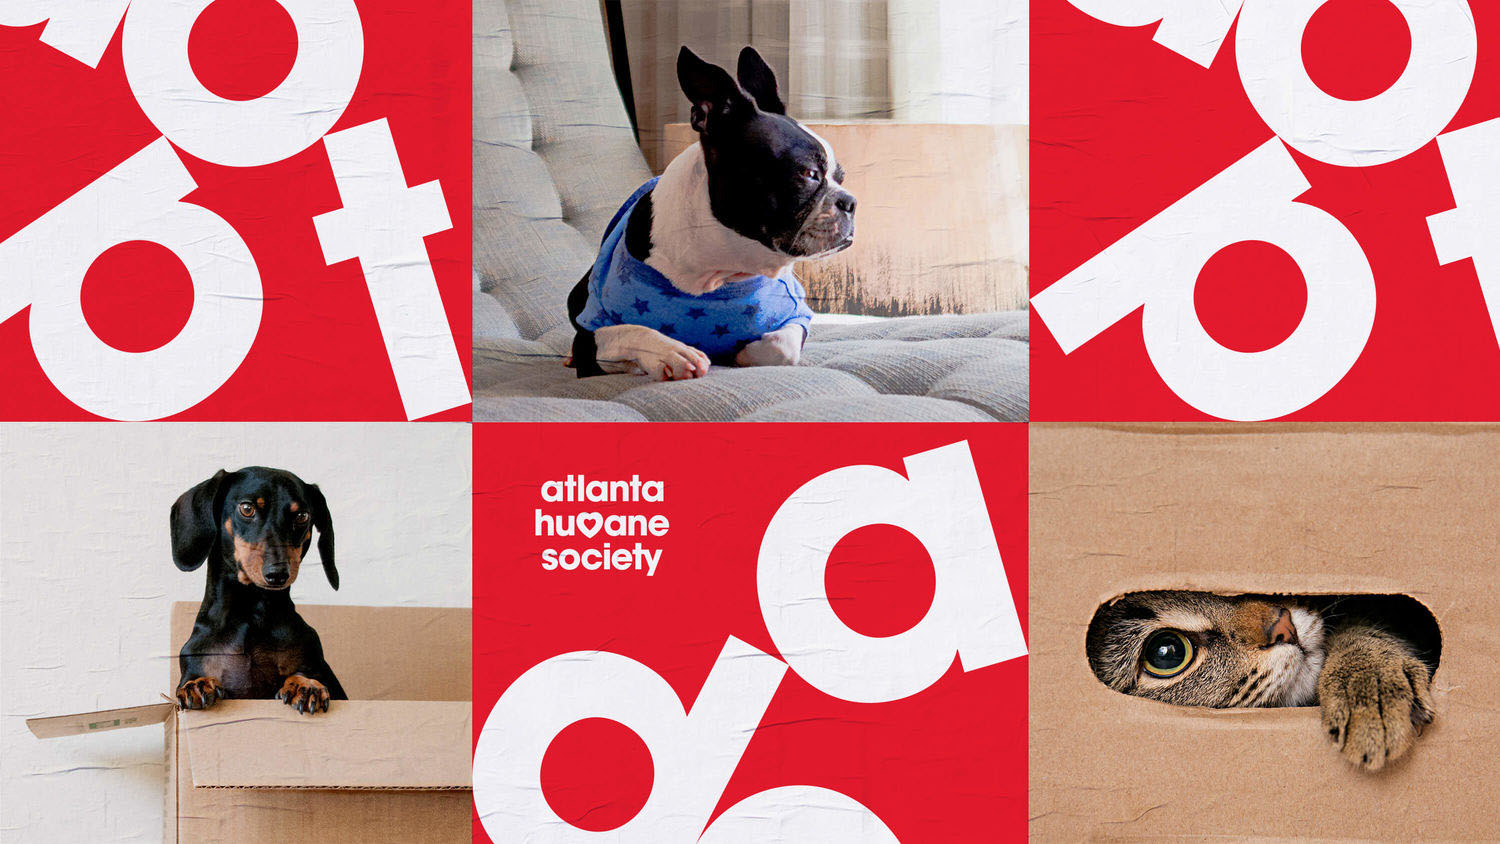 New Logo and Identity for Atlanta Humane Society by Matchstic